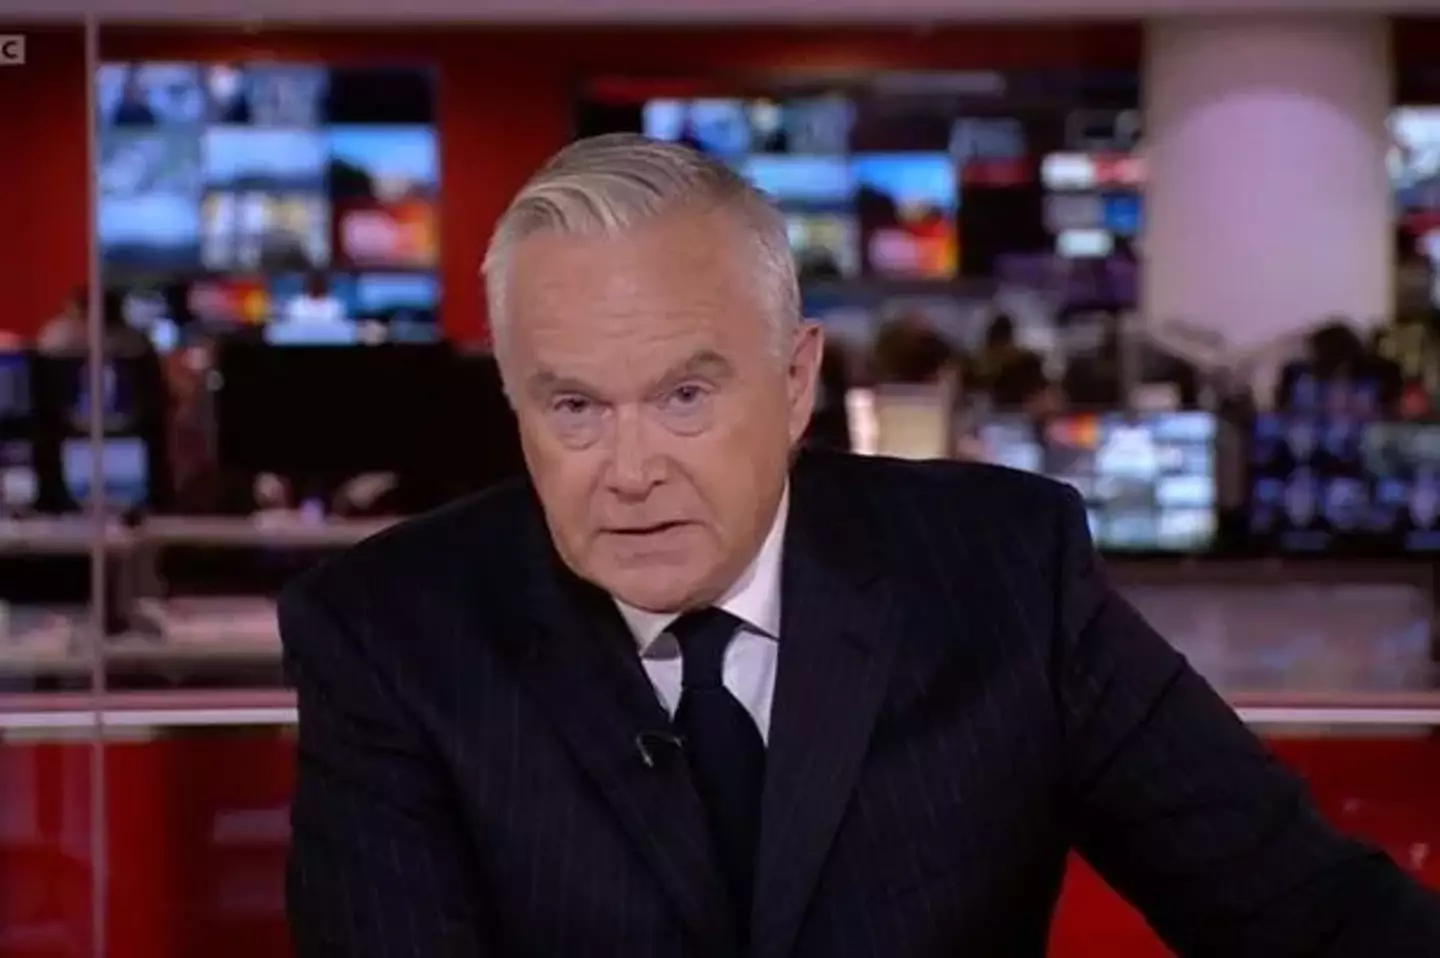 Huw Edwards has been named as the BBC presenter.